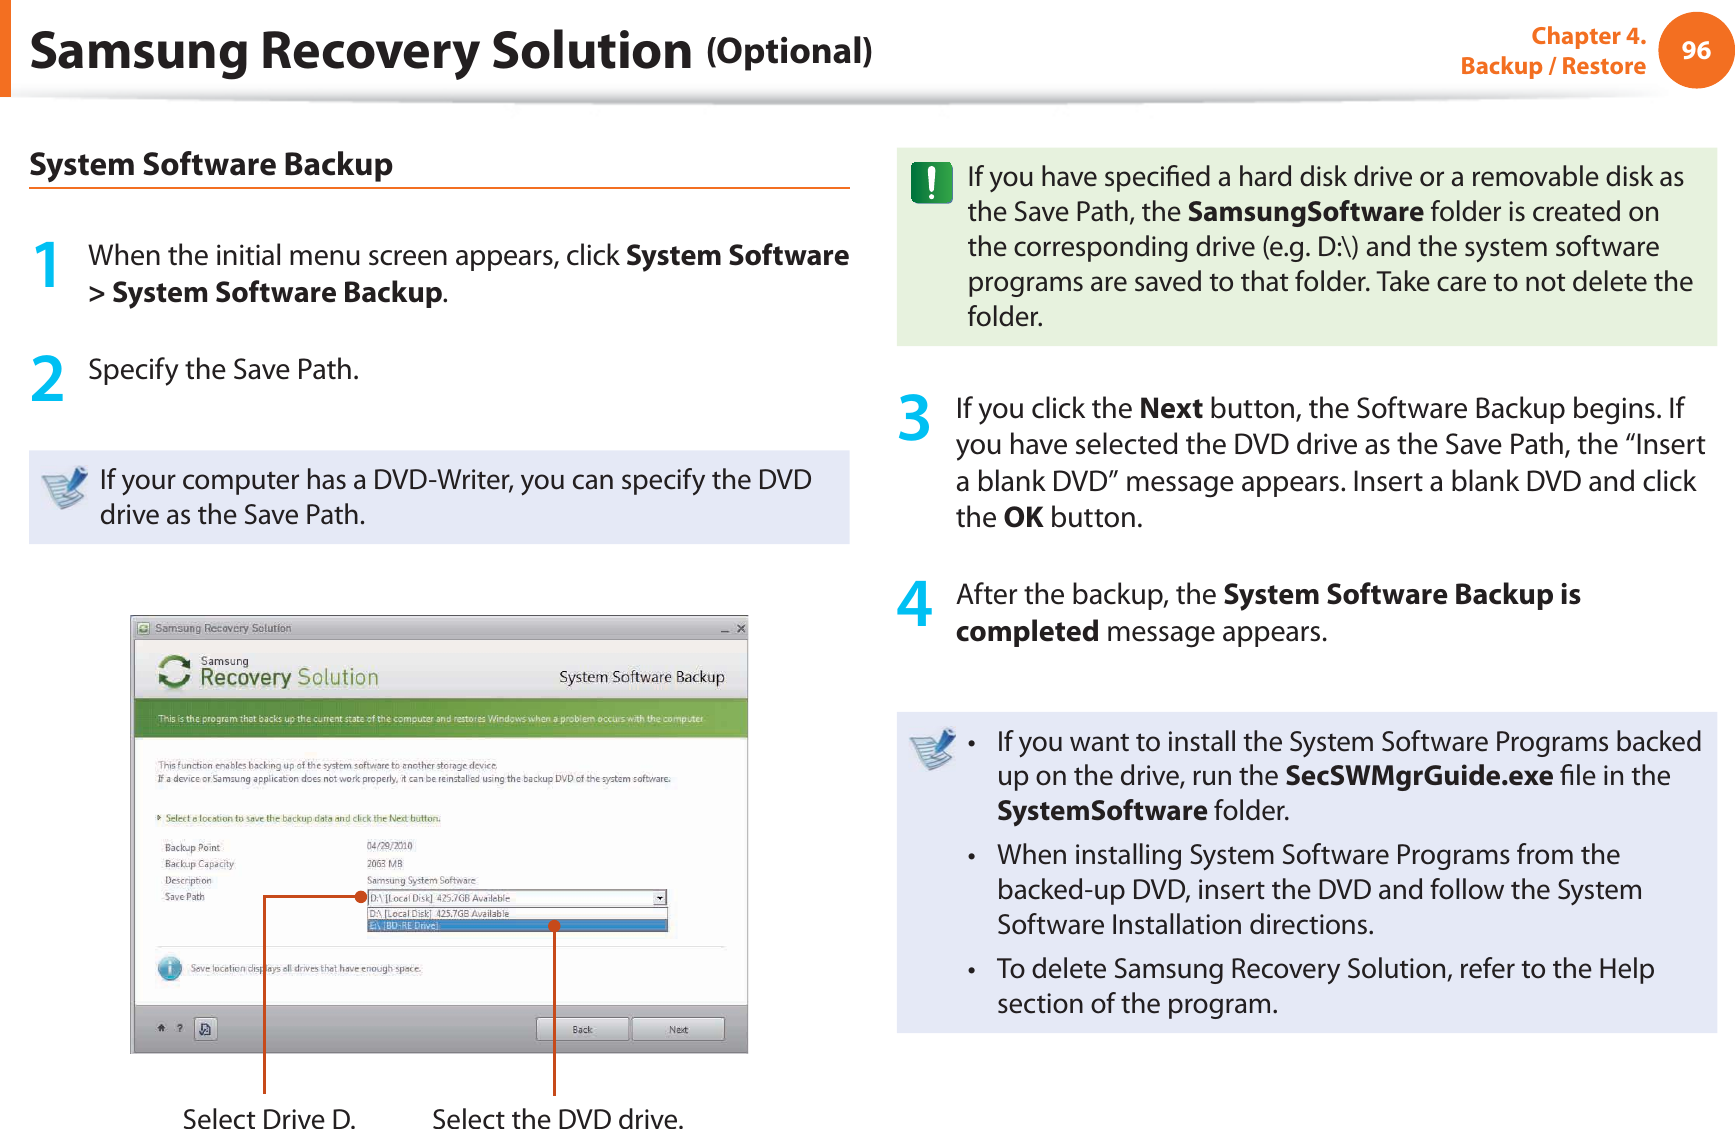 96Chapter 4.  Backup / RestoreSamsung Recovery Solution (Optional)System Software Backup1  When the initial menu screen appears, click System Software &gt; System Software Backup.2  Specify the Save Path. If your computer has a DVD-Writer, you can specify the DVD drive as the Save Path.Select Drive D. Select the DVD drive.If you have speciﬁ ed a hard disk drive or a removable disk as the Save Path, the SamsungSoftware folder is created on the corresponding drive (e.g. D:\) and the system software programs are saved to that folder. Take care to not delete the folder. 3  If you click the Next button, the Software Backup begins. If you have selected the DVD drive as the Save Path, the “Insert a blank DVD” message appears. Insert a blank DVD and click the OK button.4  After the backup, the System Software Backup is completed message appears.If you want to install the System Software Programs backed t up on the drive, run the SecSWMgrGuide.exe ﬁ le in the SystemSoftware folder.When installing System Software Programs from the t backed-up DVD, insert the DVD and follow the System Software Installation directions.To delete Samsung Recovery Solution, refer to the Help t section of the program.